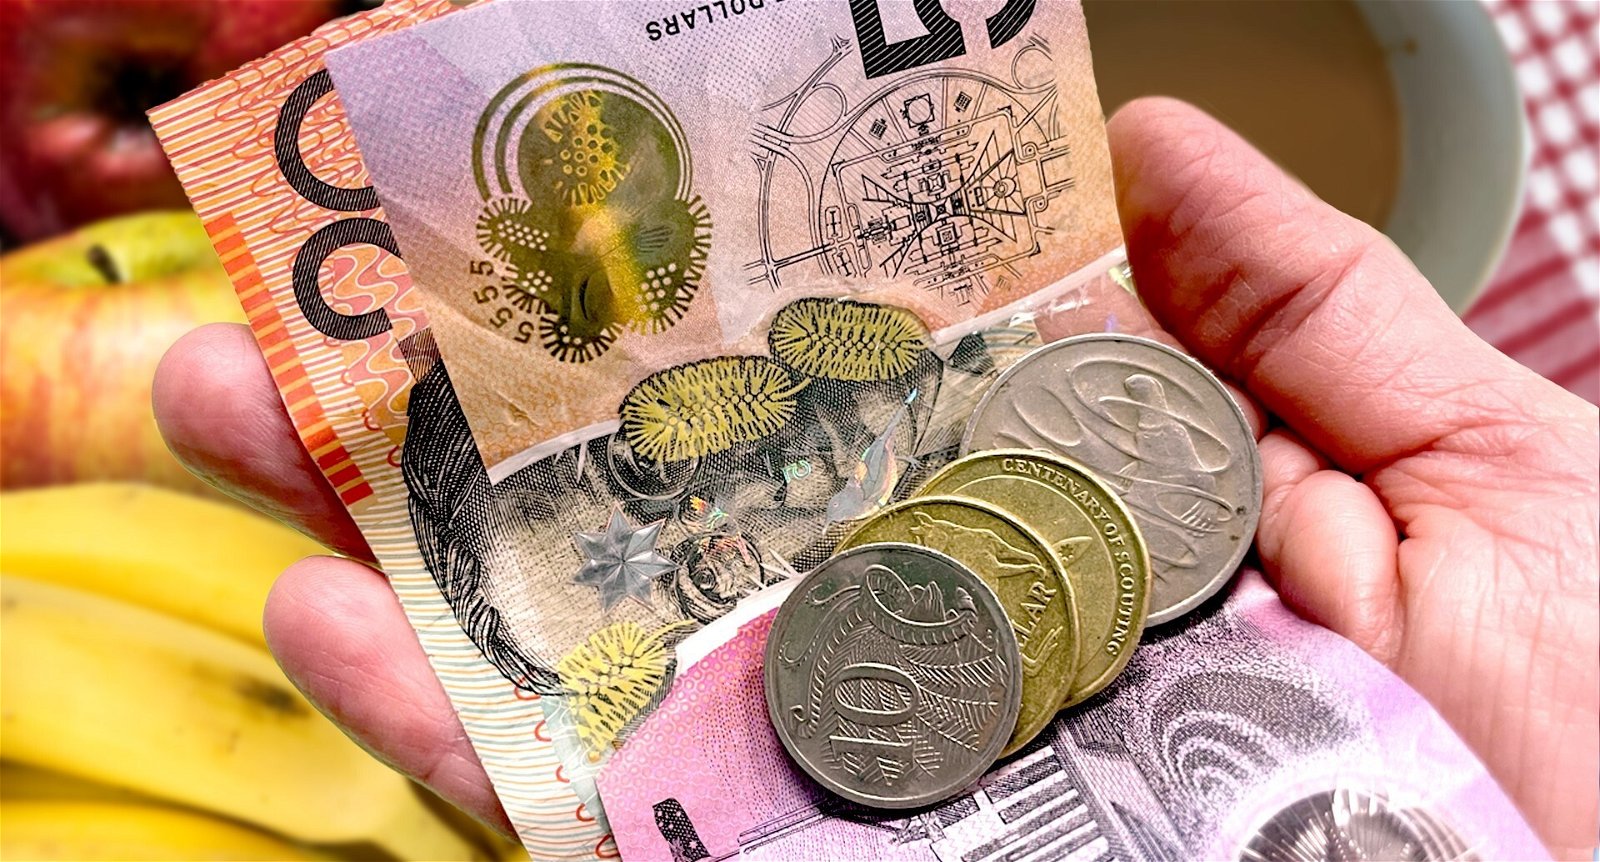 Australian cash and coins being held in a hand.